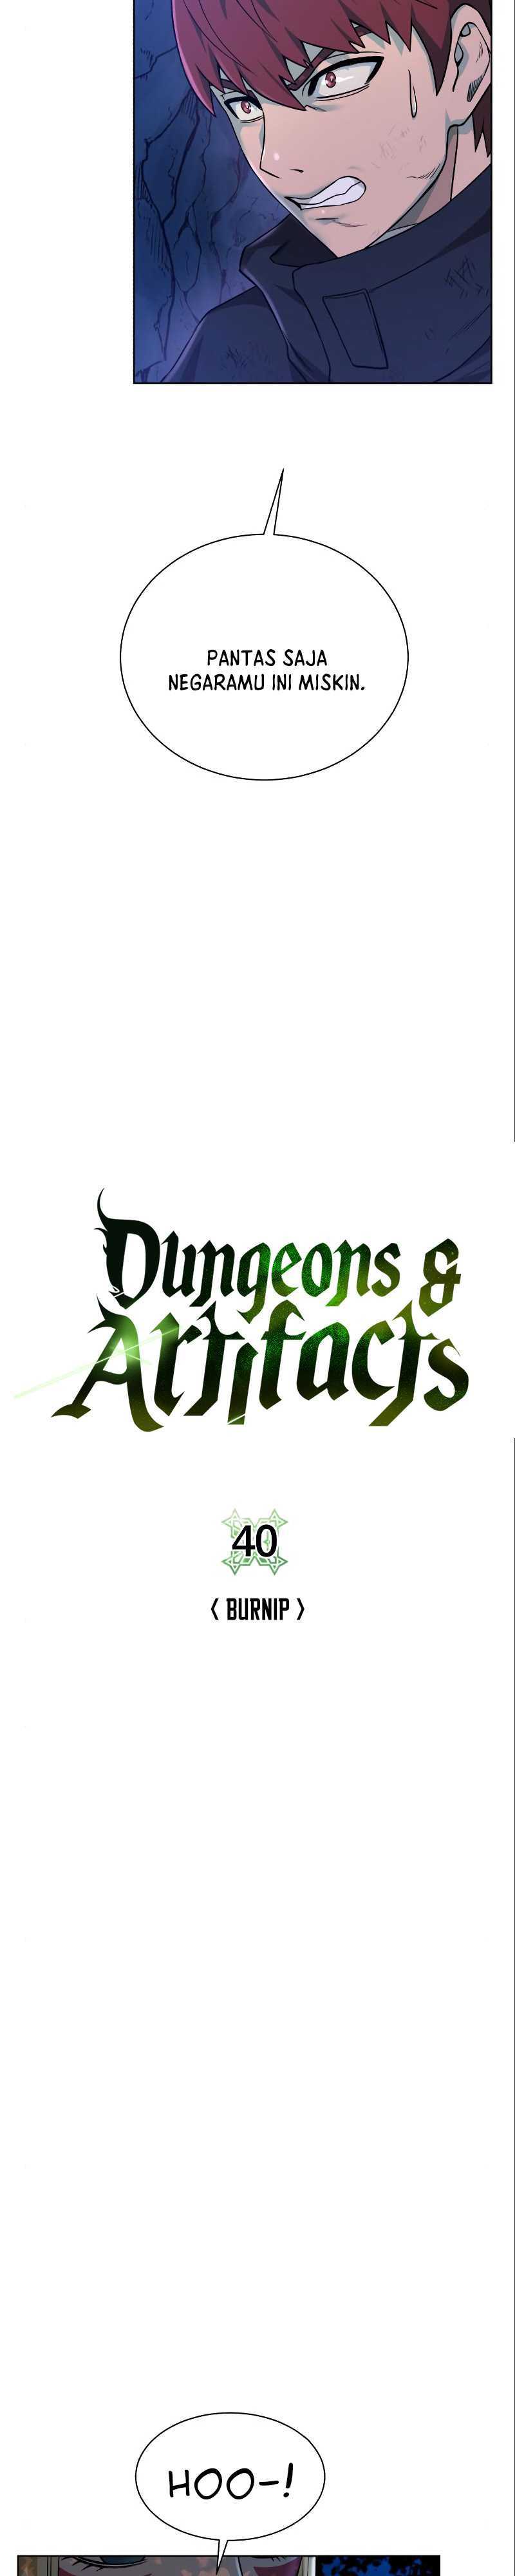 Dungeons & Artifacts Chapter 40